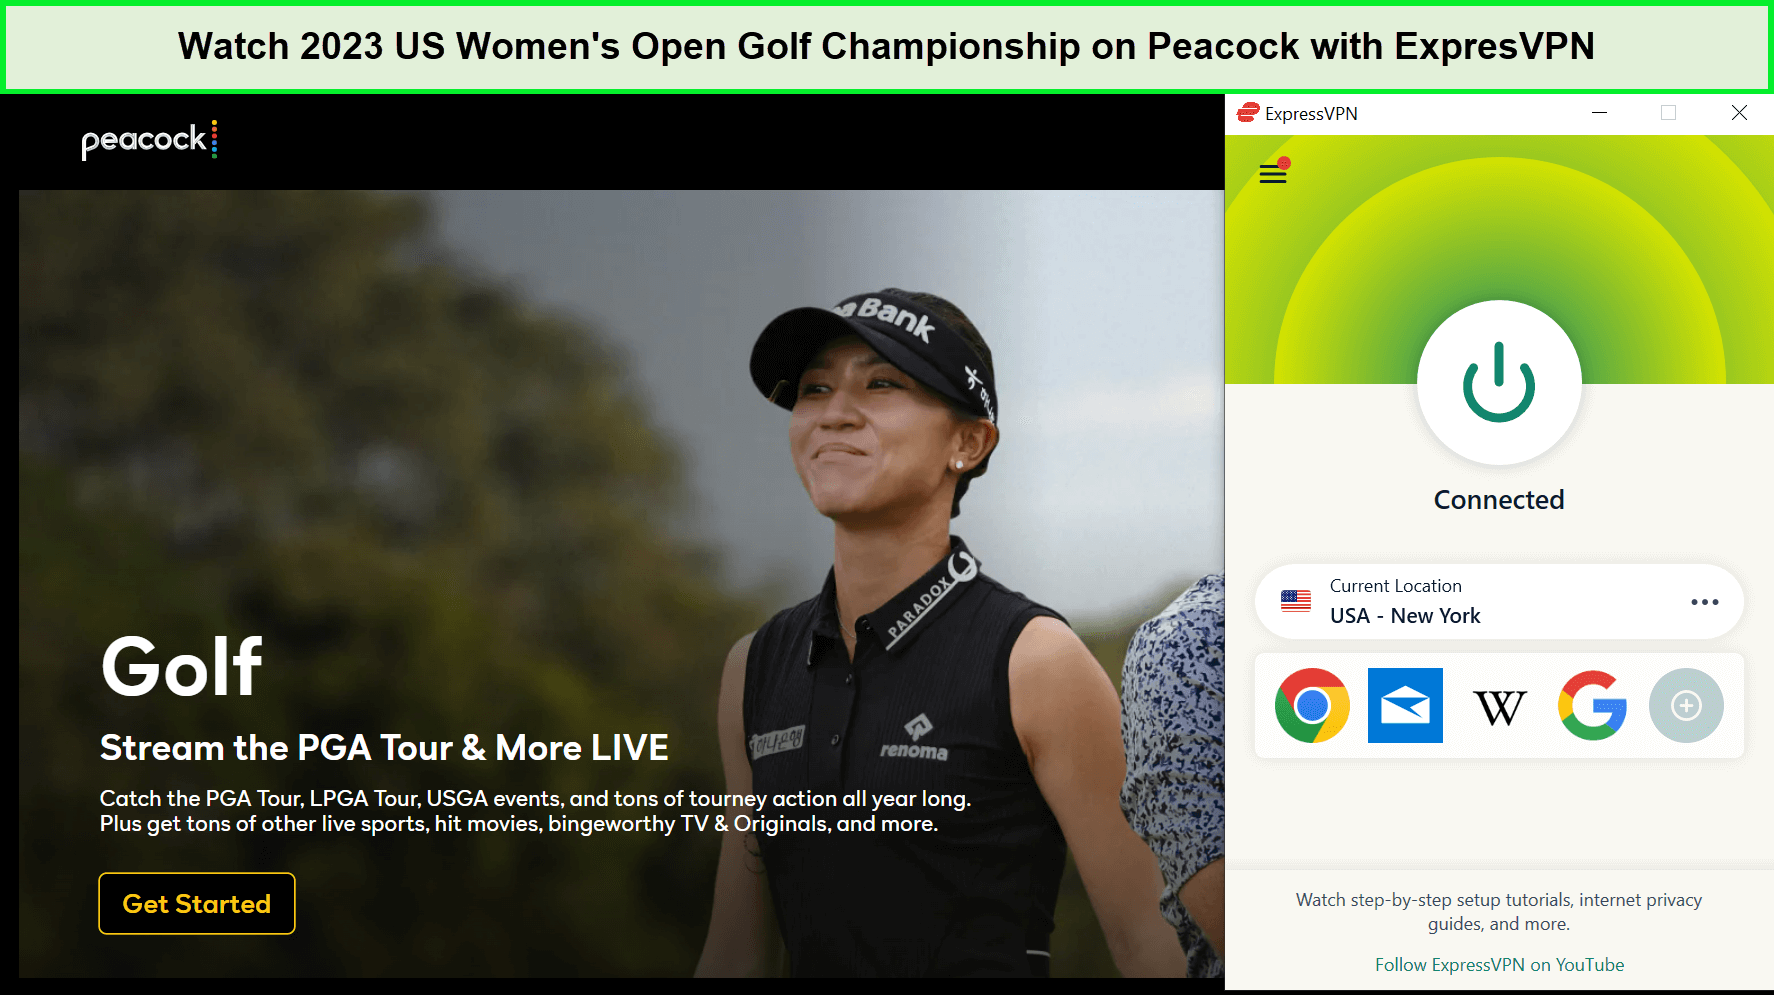 Watch-2023-US-Womens-Open-Golf-Championship-in-Singapore-on-Peacock-with-ExpresVPN